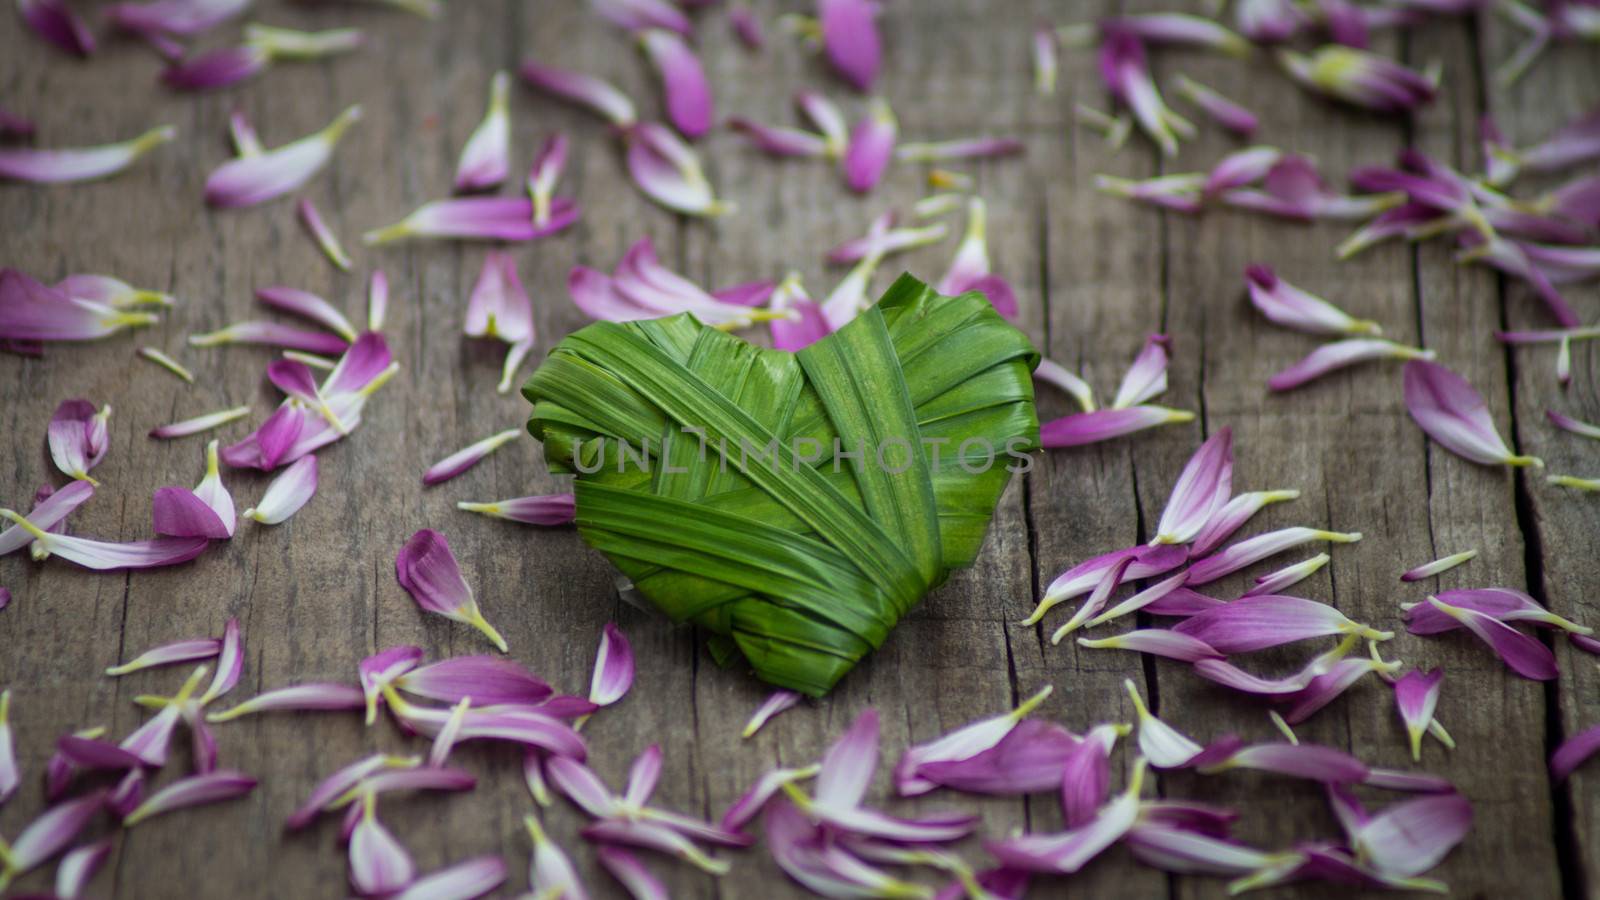 A plam leaf heart surrounded by purple petals on wood background.